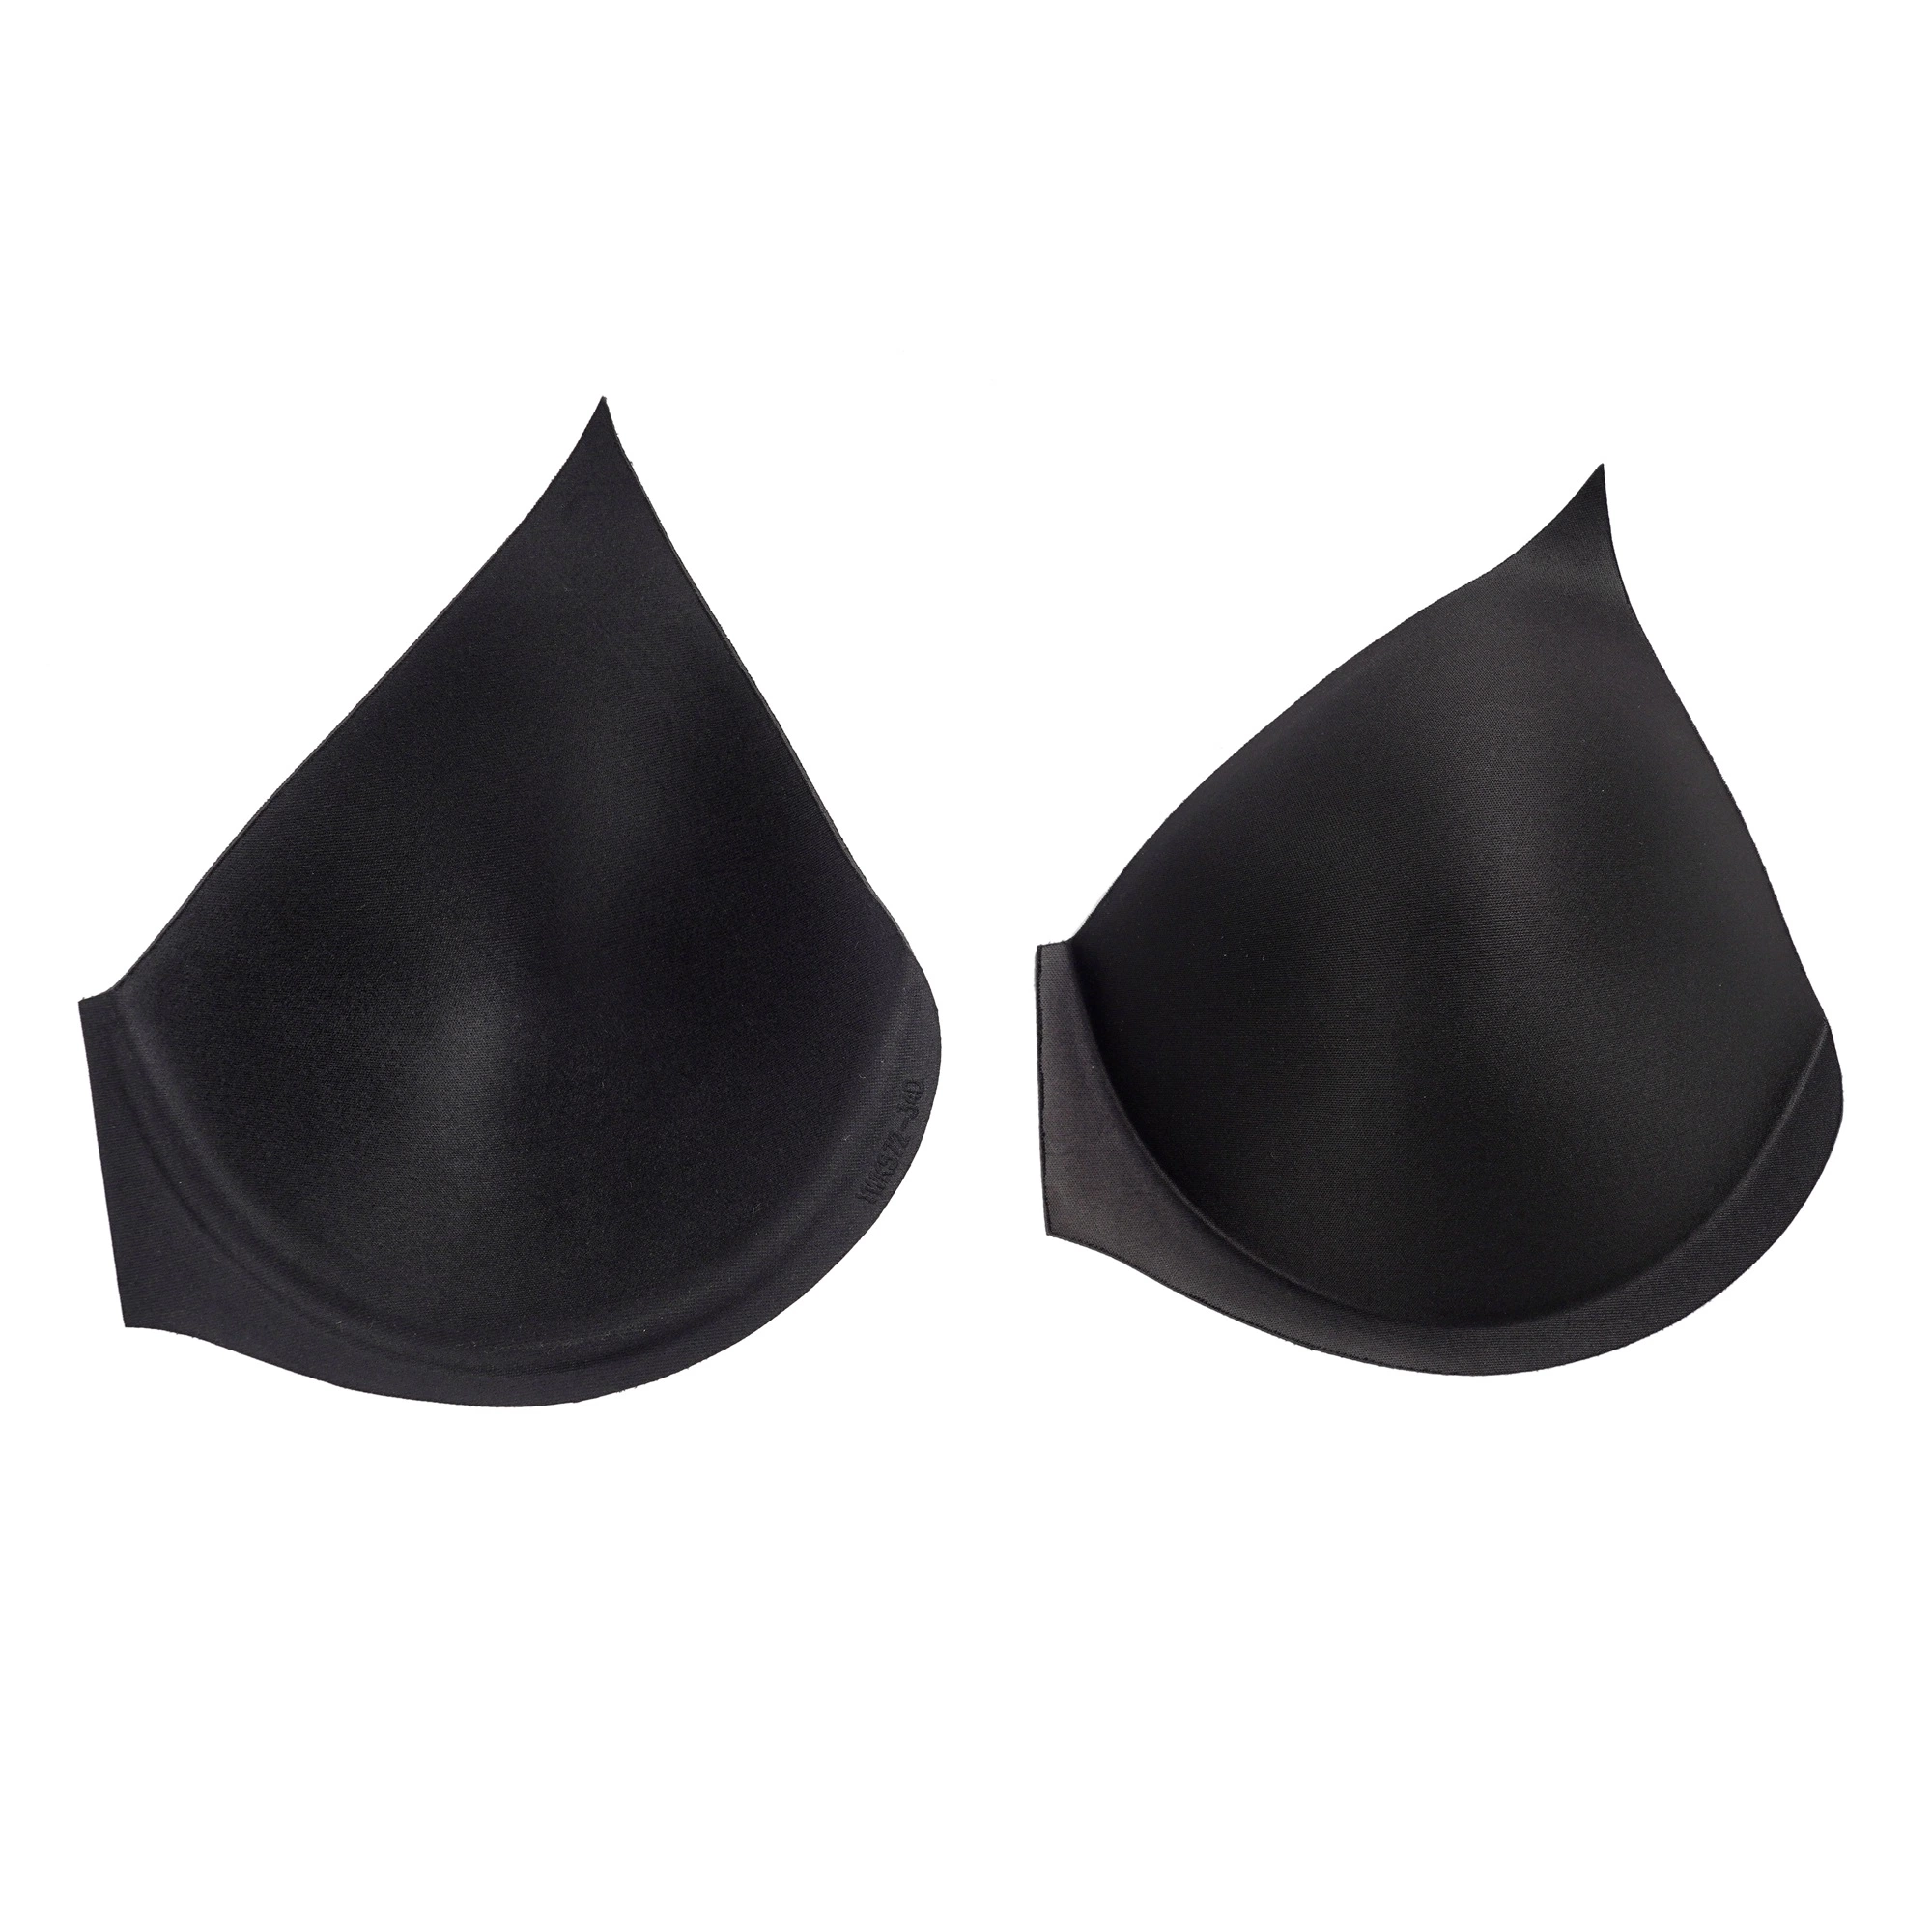 Wholesale Moulded Swimwear Accessories Push up Triangle Molded Push up Foam Bra Pads